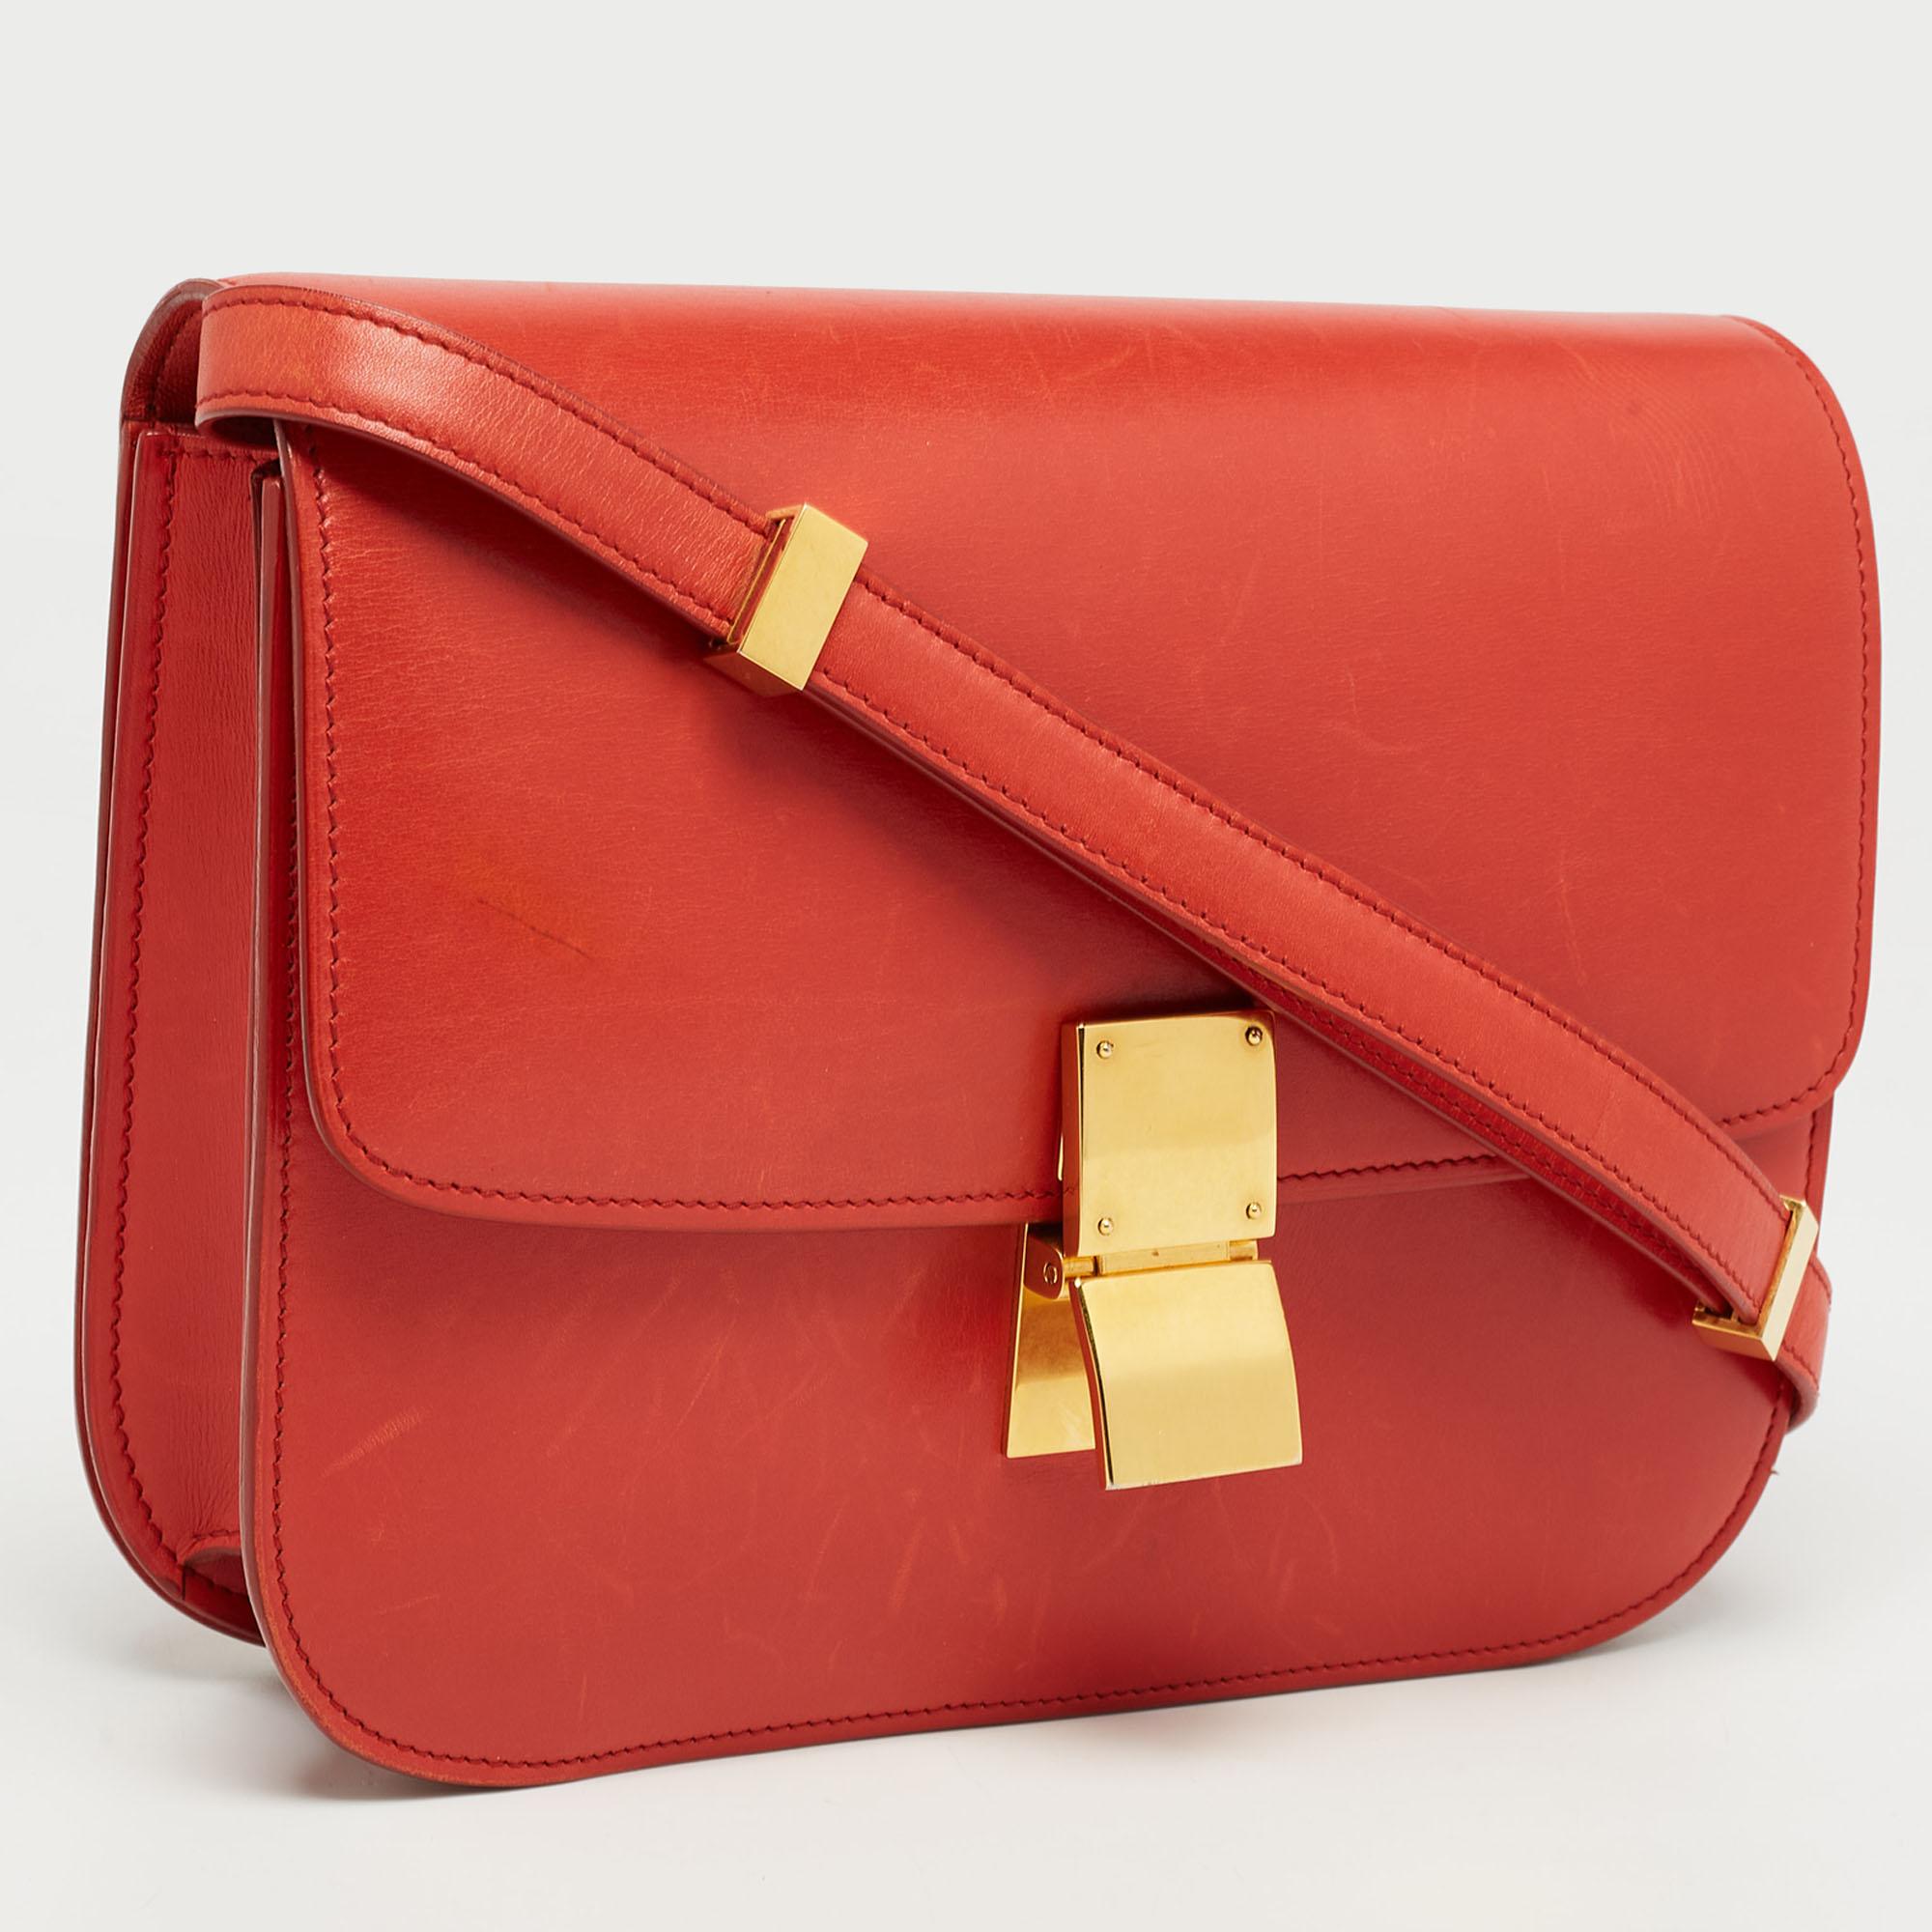 From the house of Celine comes this gorgeous Classic Box flap bag that will perfectly complement all your outfits. It has been luxuriously crafted from leather and styled with a flap that opens to a well-sized leather interior. The bag is high on